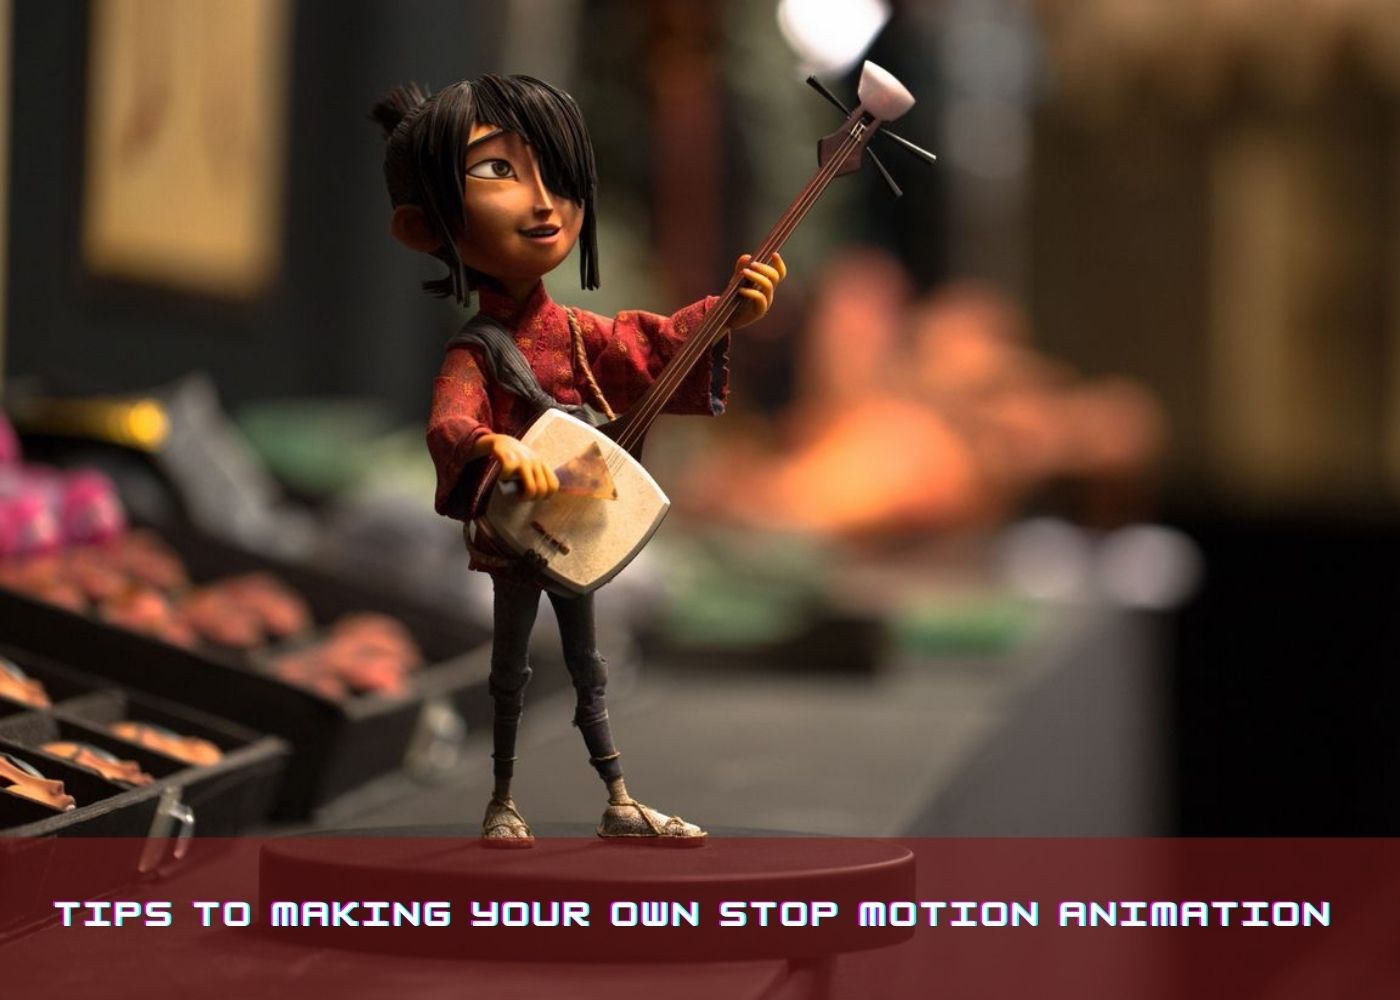 How to Make Your Own Stop Motion Animation